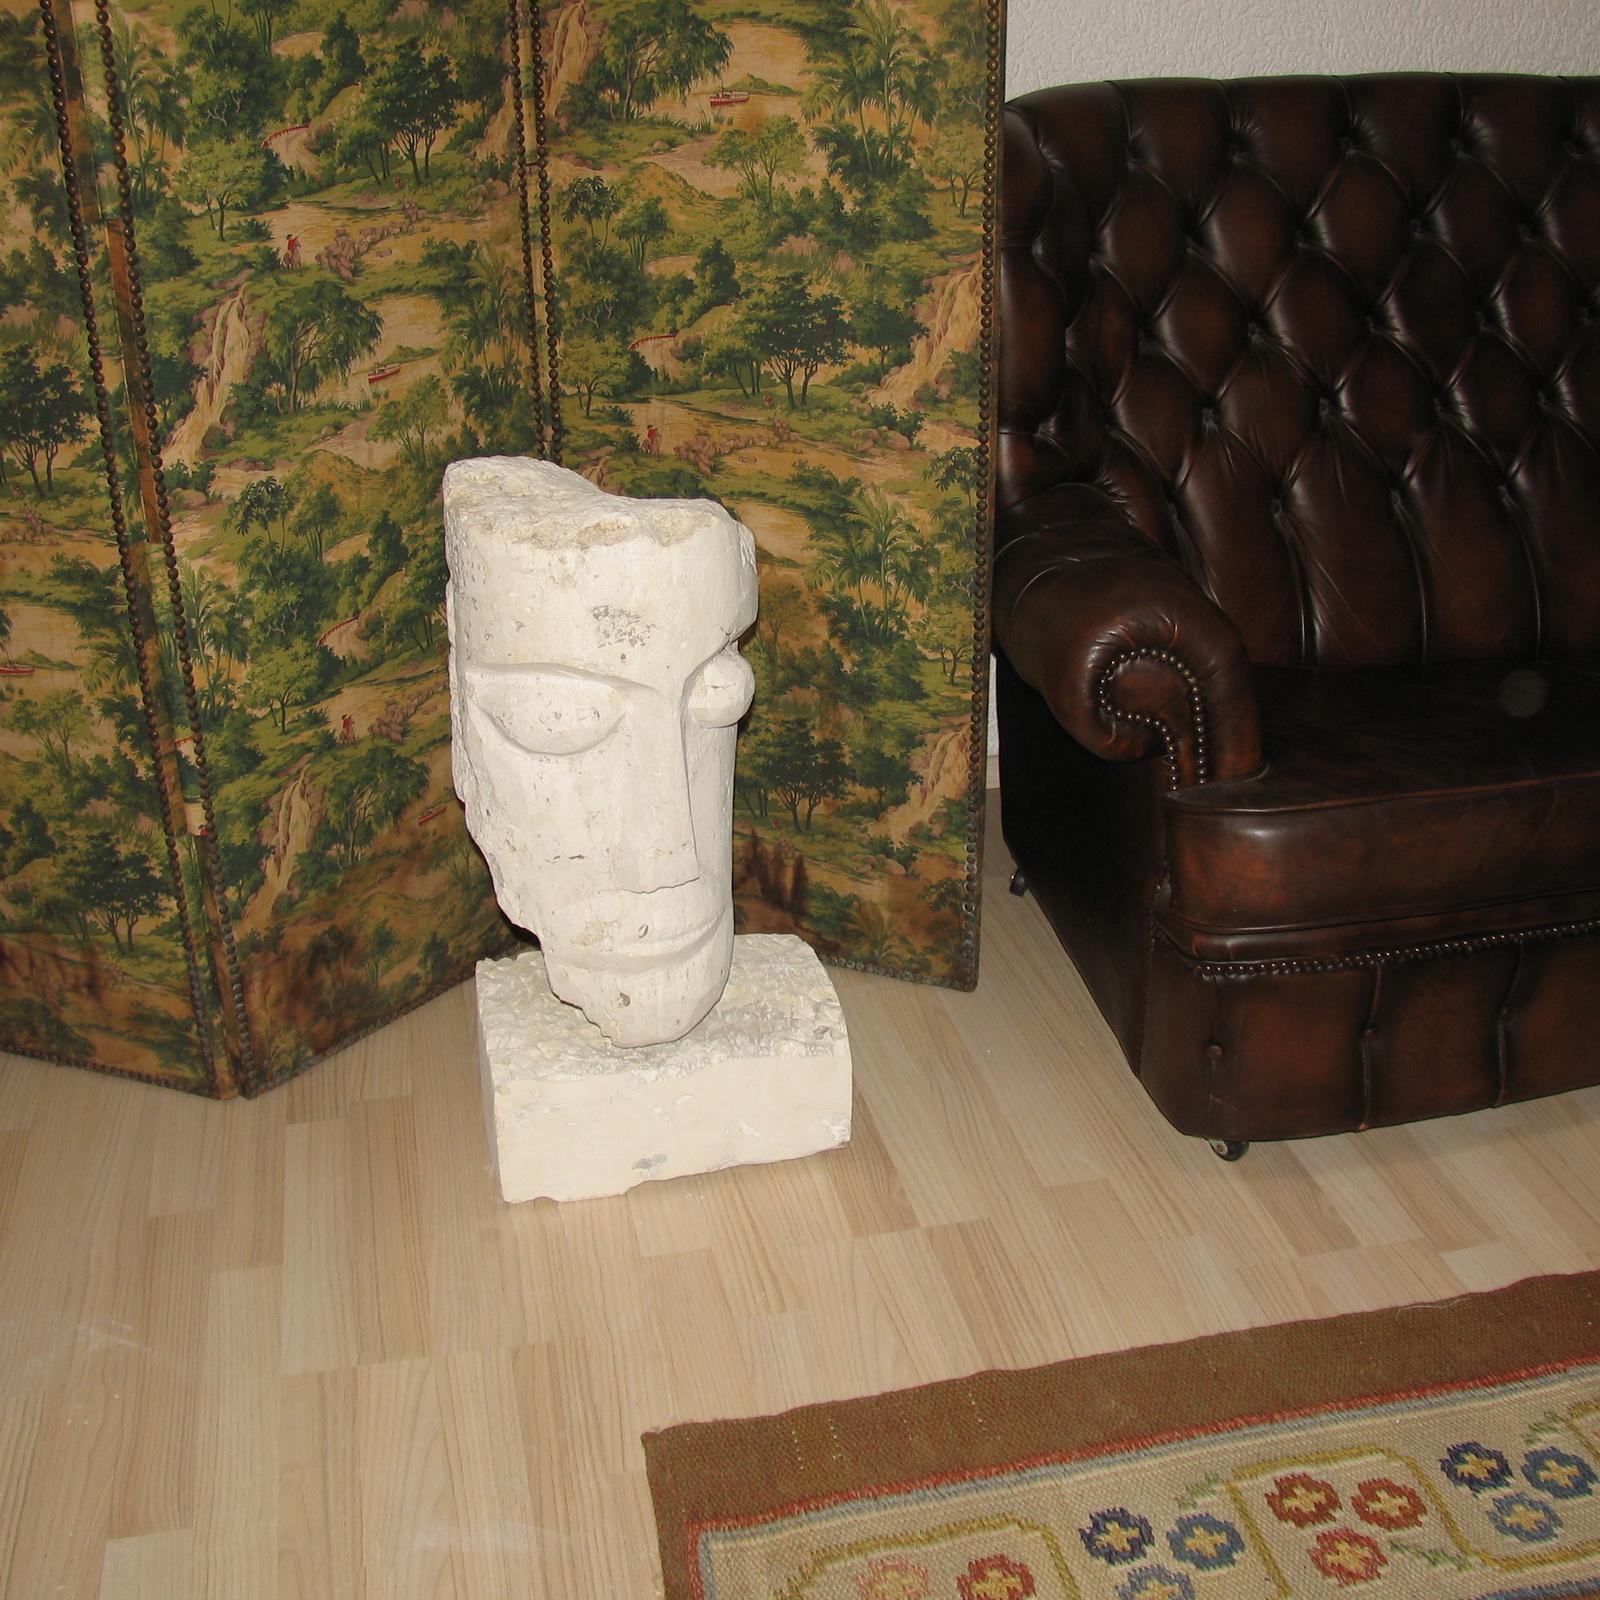 Impressive large sculpture realized in carved stone, circa 1960s.
The sculpture is depicting a man with a very strong facial expression.
Extremely heavy, needs crate for shipping, which will be added to the shipping price.

Dimensions:
Measures: